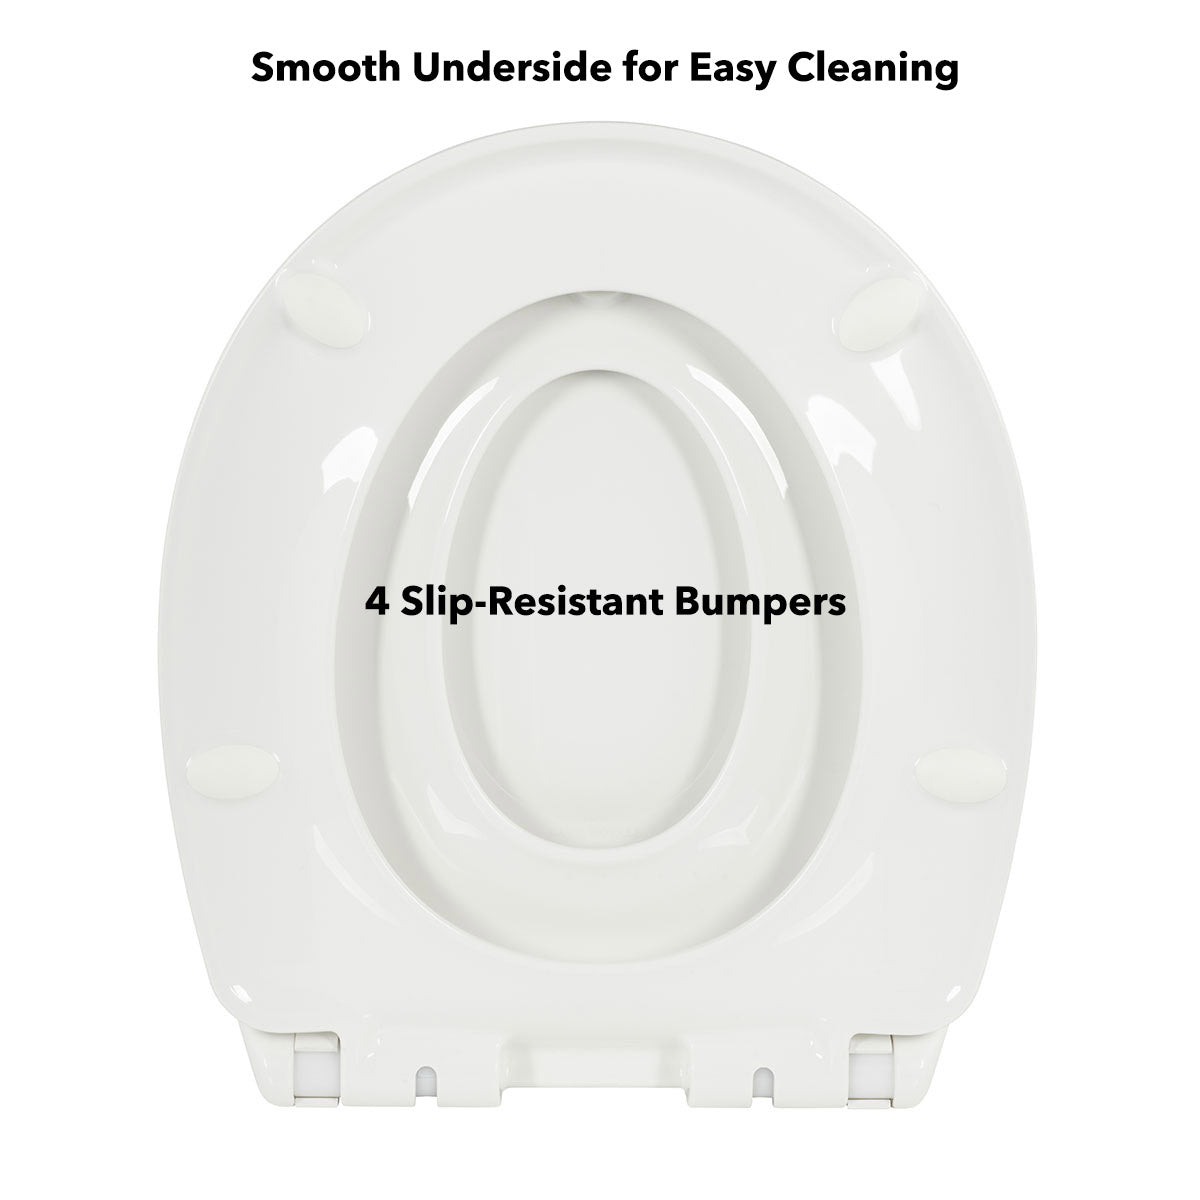 Kingsport Family Toilet Seat with Built-In Child Seat